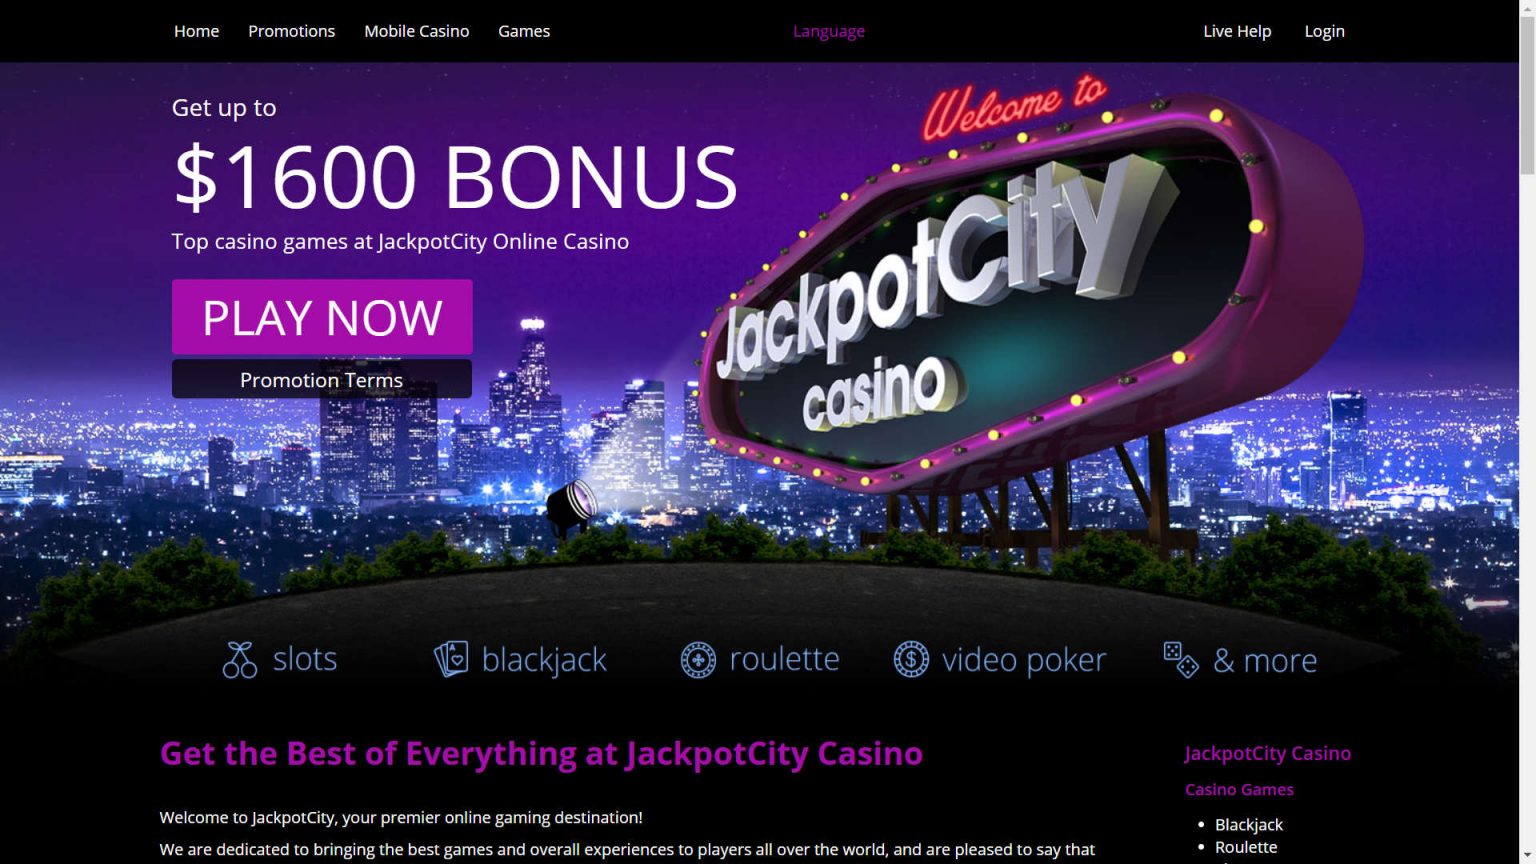 Best casino online Android/iPhone Apps